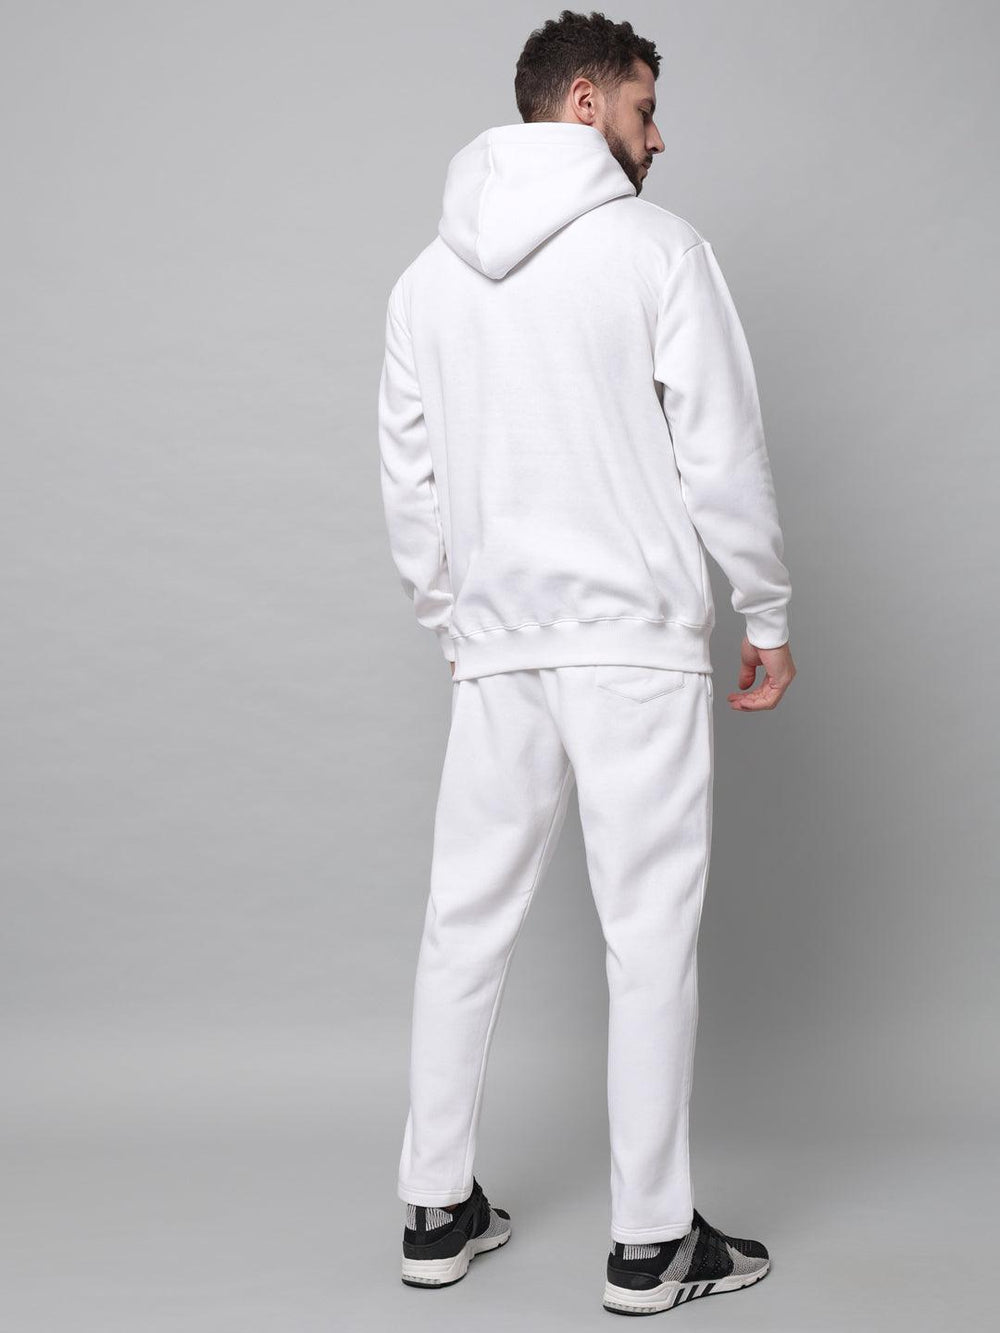 Griffel Men's Front Logo Solid Fleece Basic Hoodie and Joggers Full set White Tracksuit - griffel